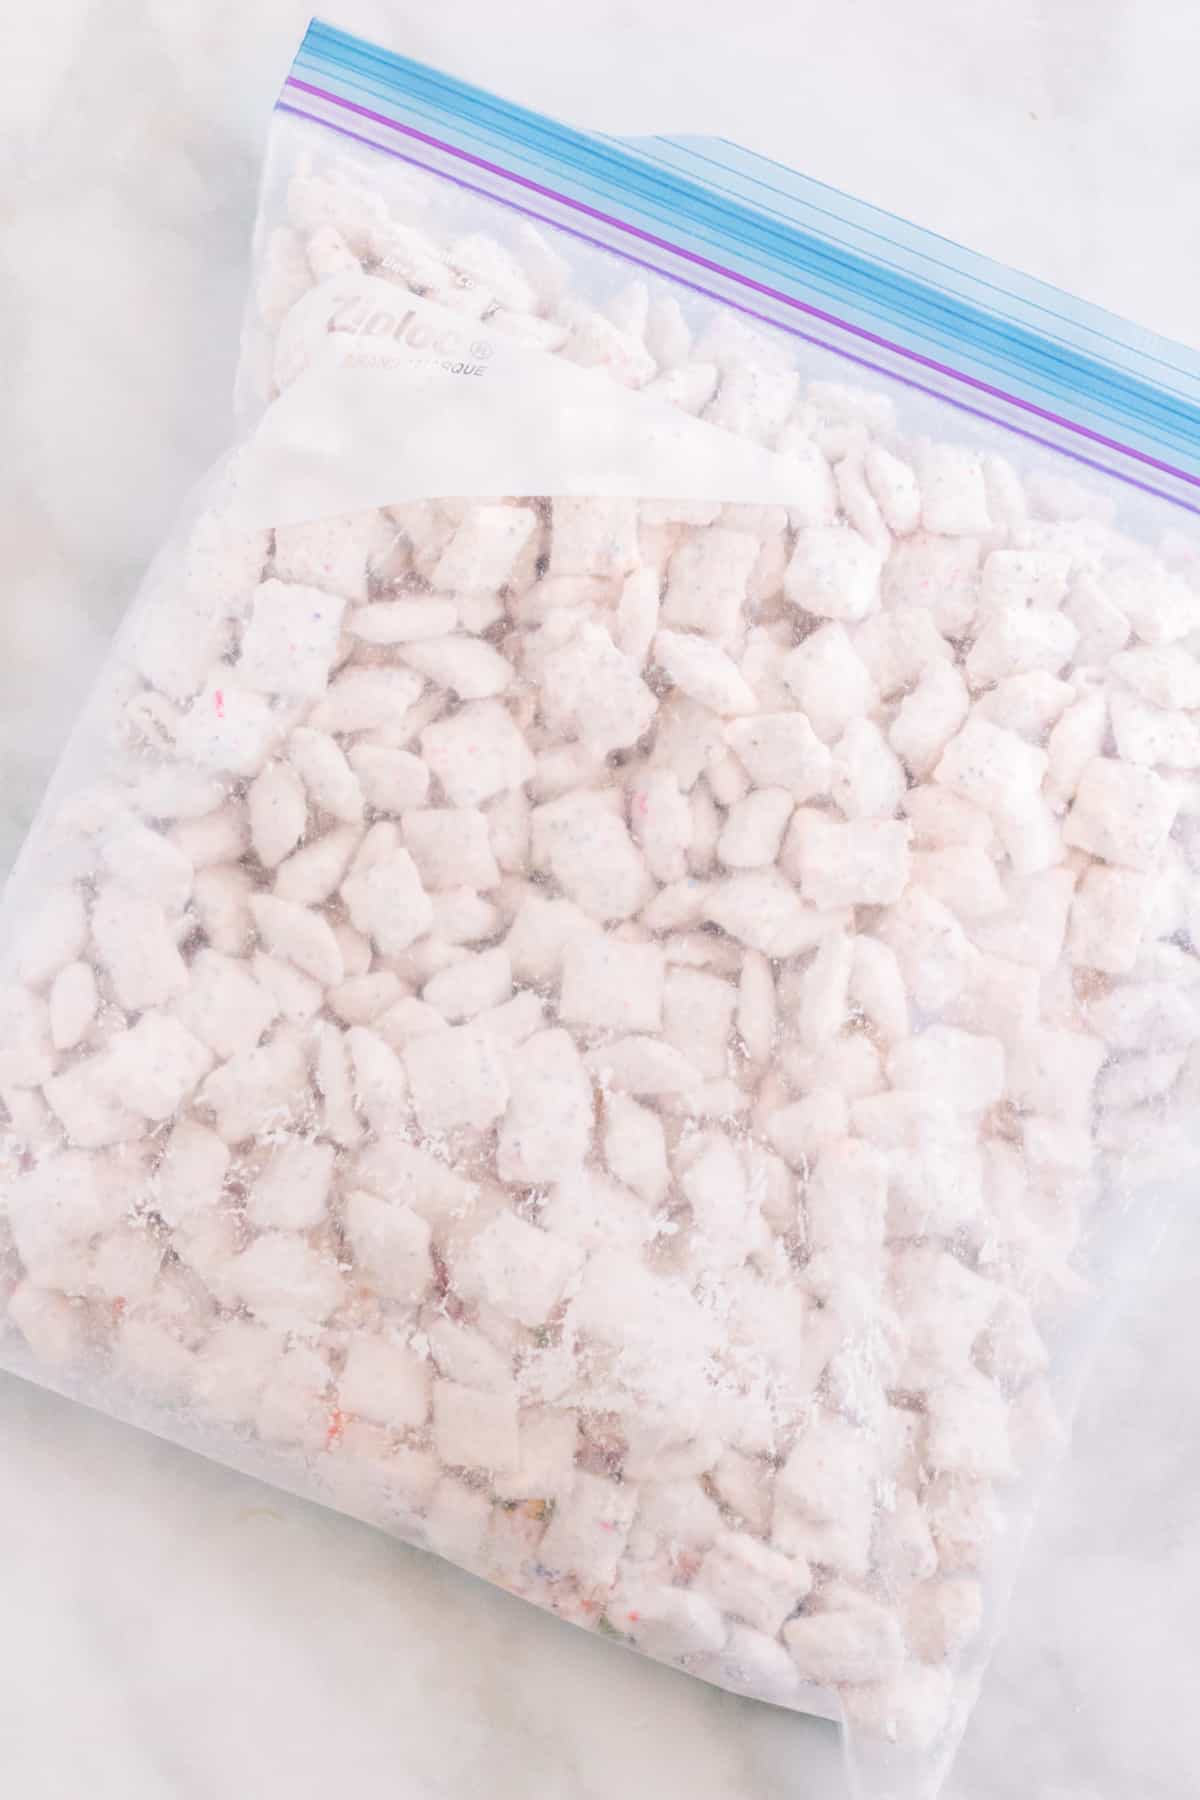 Large gallon size ziplock baggie filled with powdered sugar, funfetti mix, and white chocolate coated chex cereal